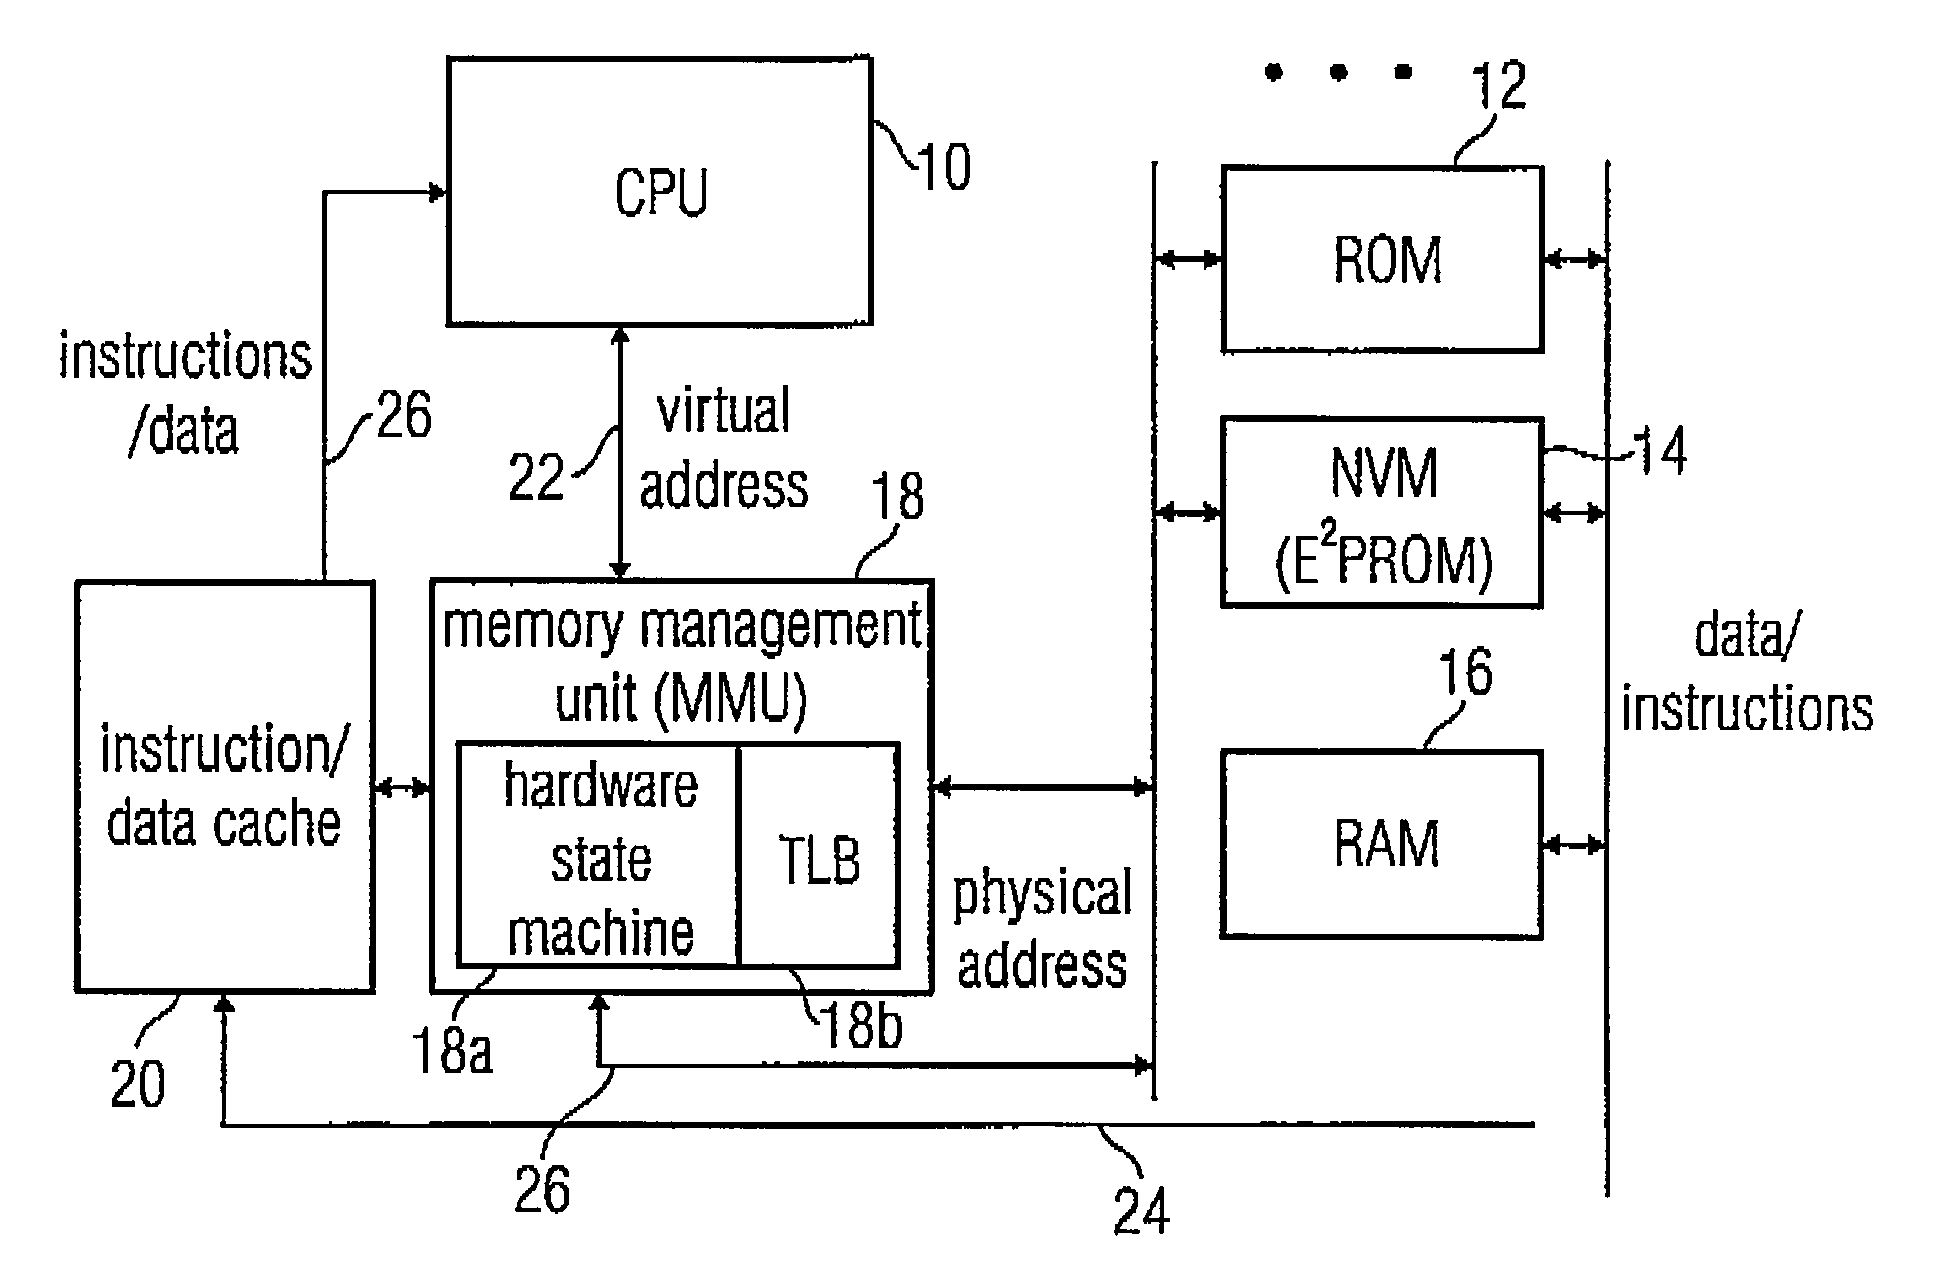 Apparatus and method for determining a physical address from a virtual address by using a hierarchical mapping regulation with compressed nodes